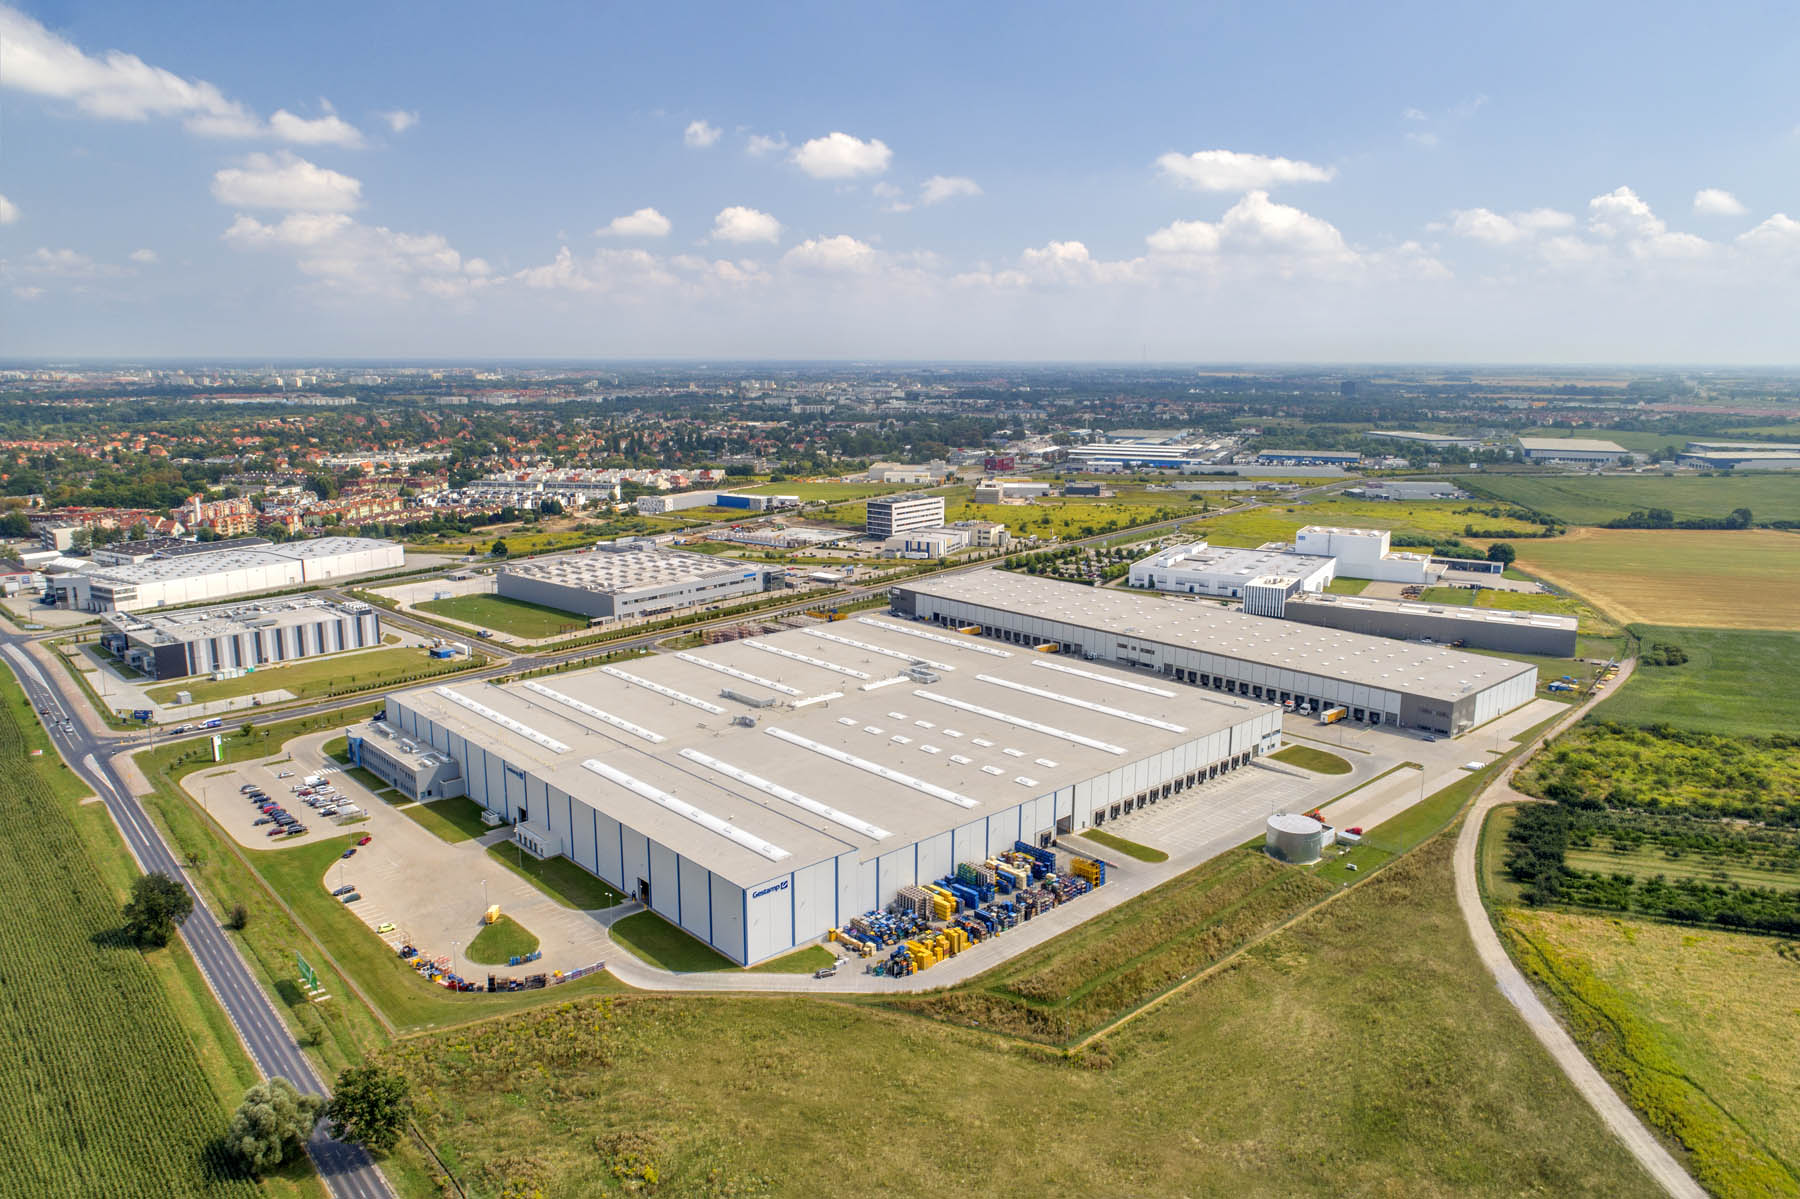 Aerial view of warehouse in Wroclaw IV Logistics Centre.